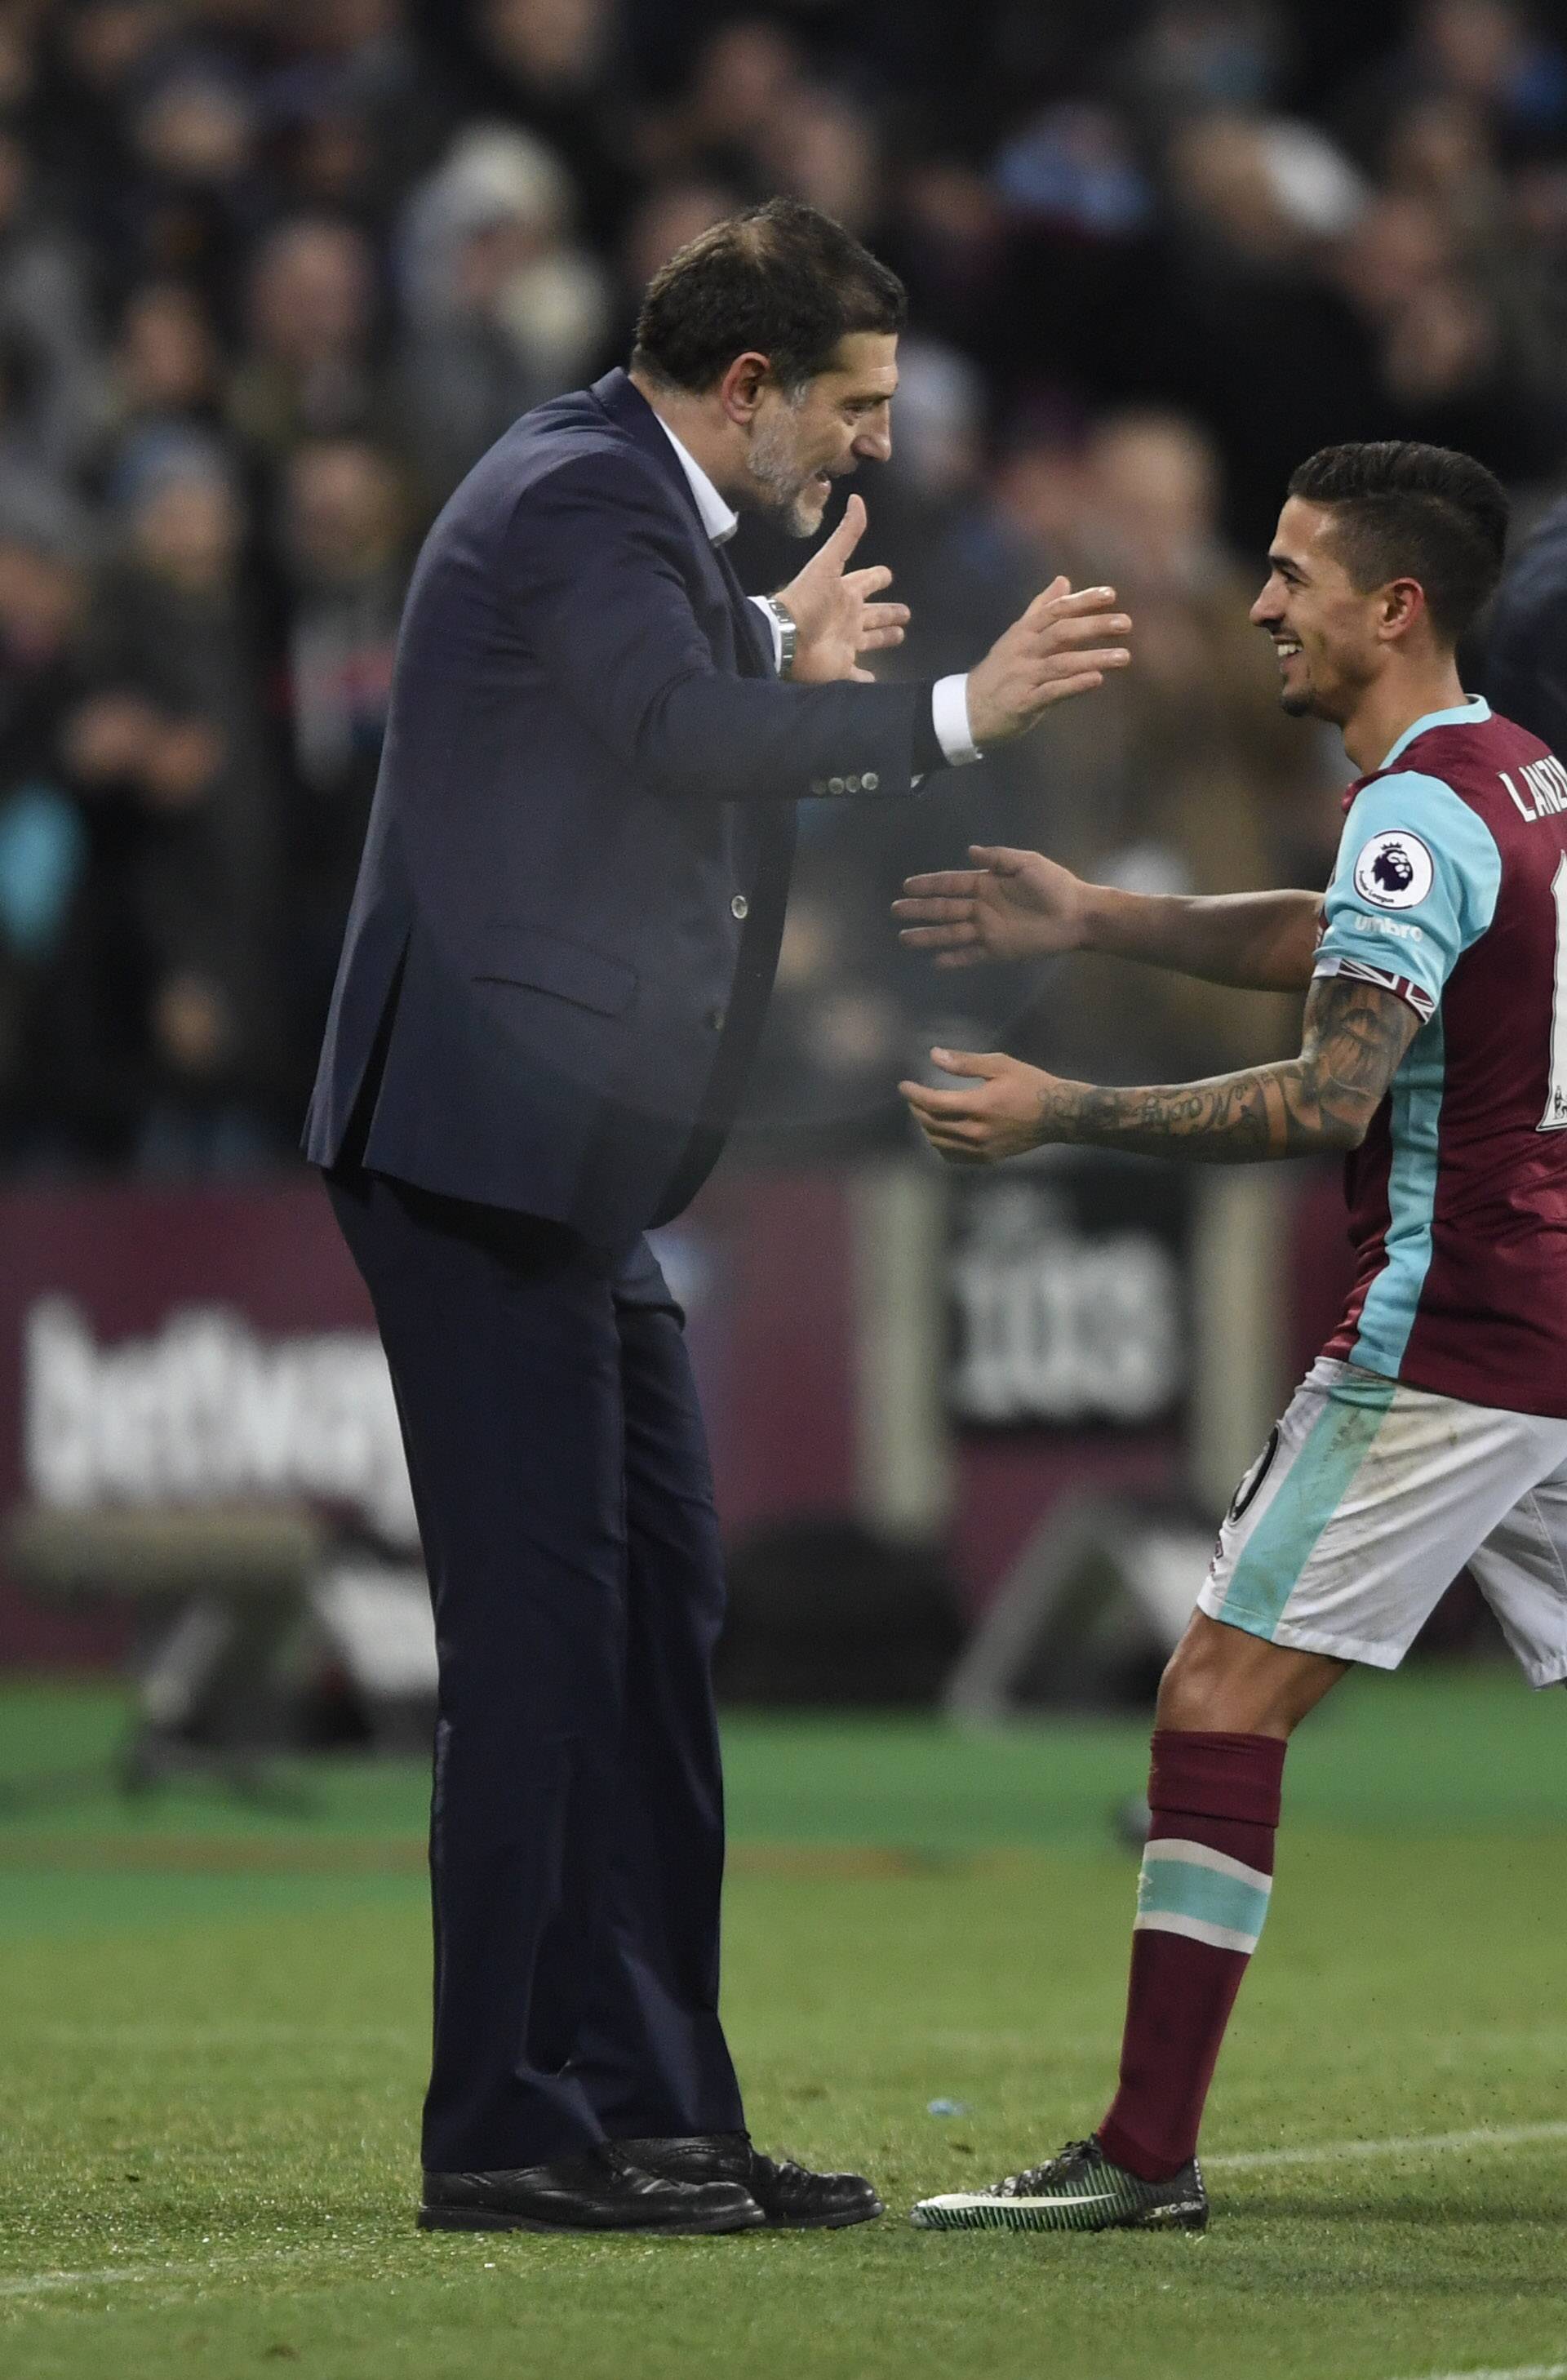 West Ham United's Manuel Lanzini is congratulated by manager Slaven Bilic as he is substituted